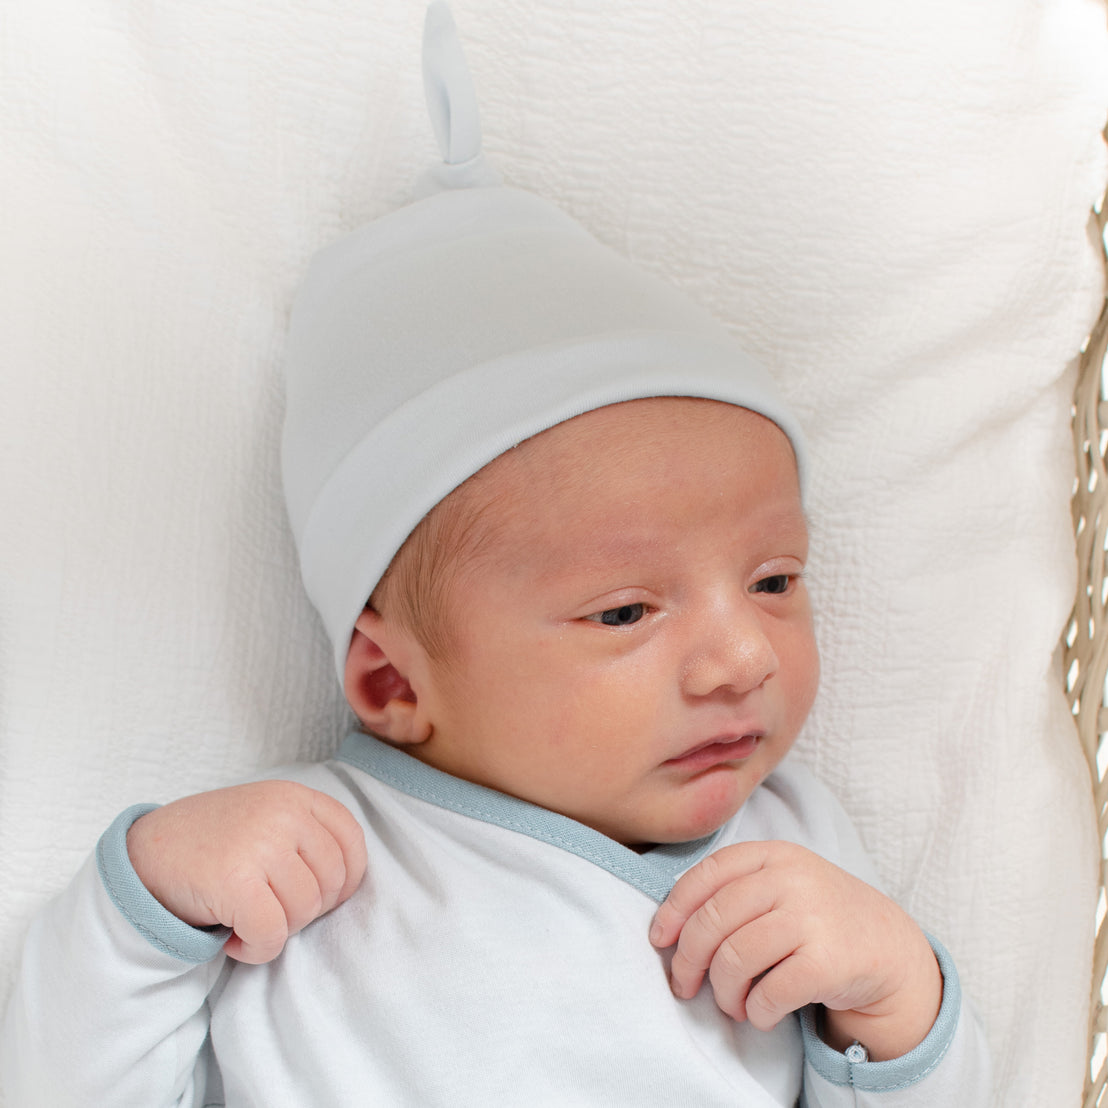 A newborn baby with a light complexion, wearing an Aiden Newborn Knot Cap and a blue outfit, lying comfortably in a white basket, looking slightly to the side as they are coming home from the hospital.